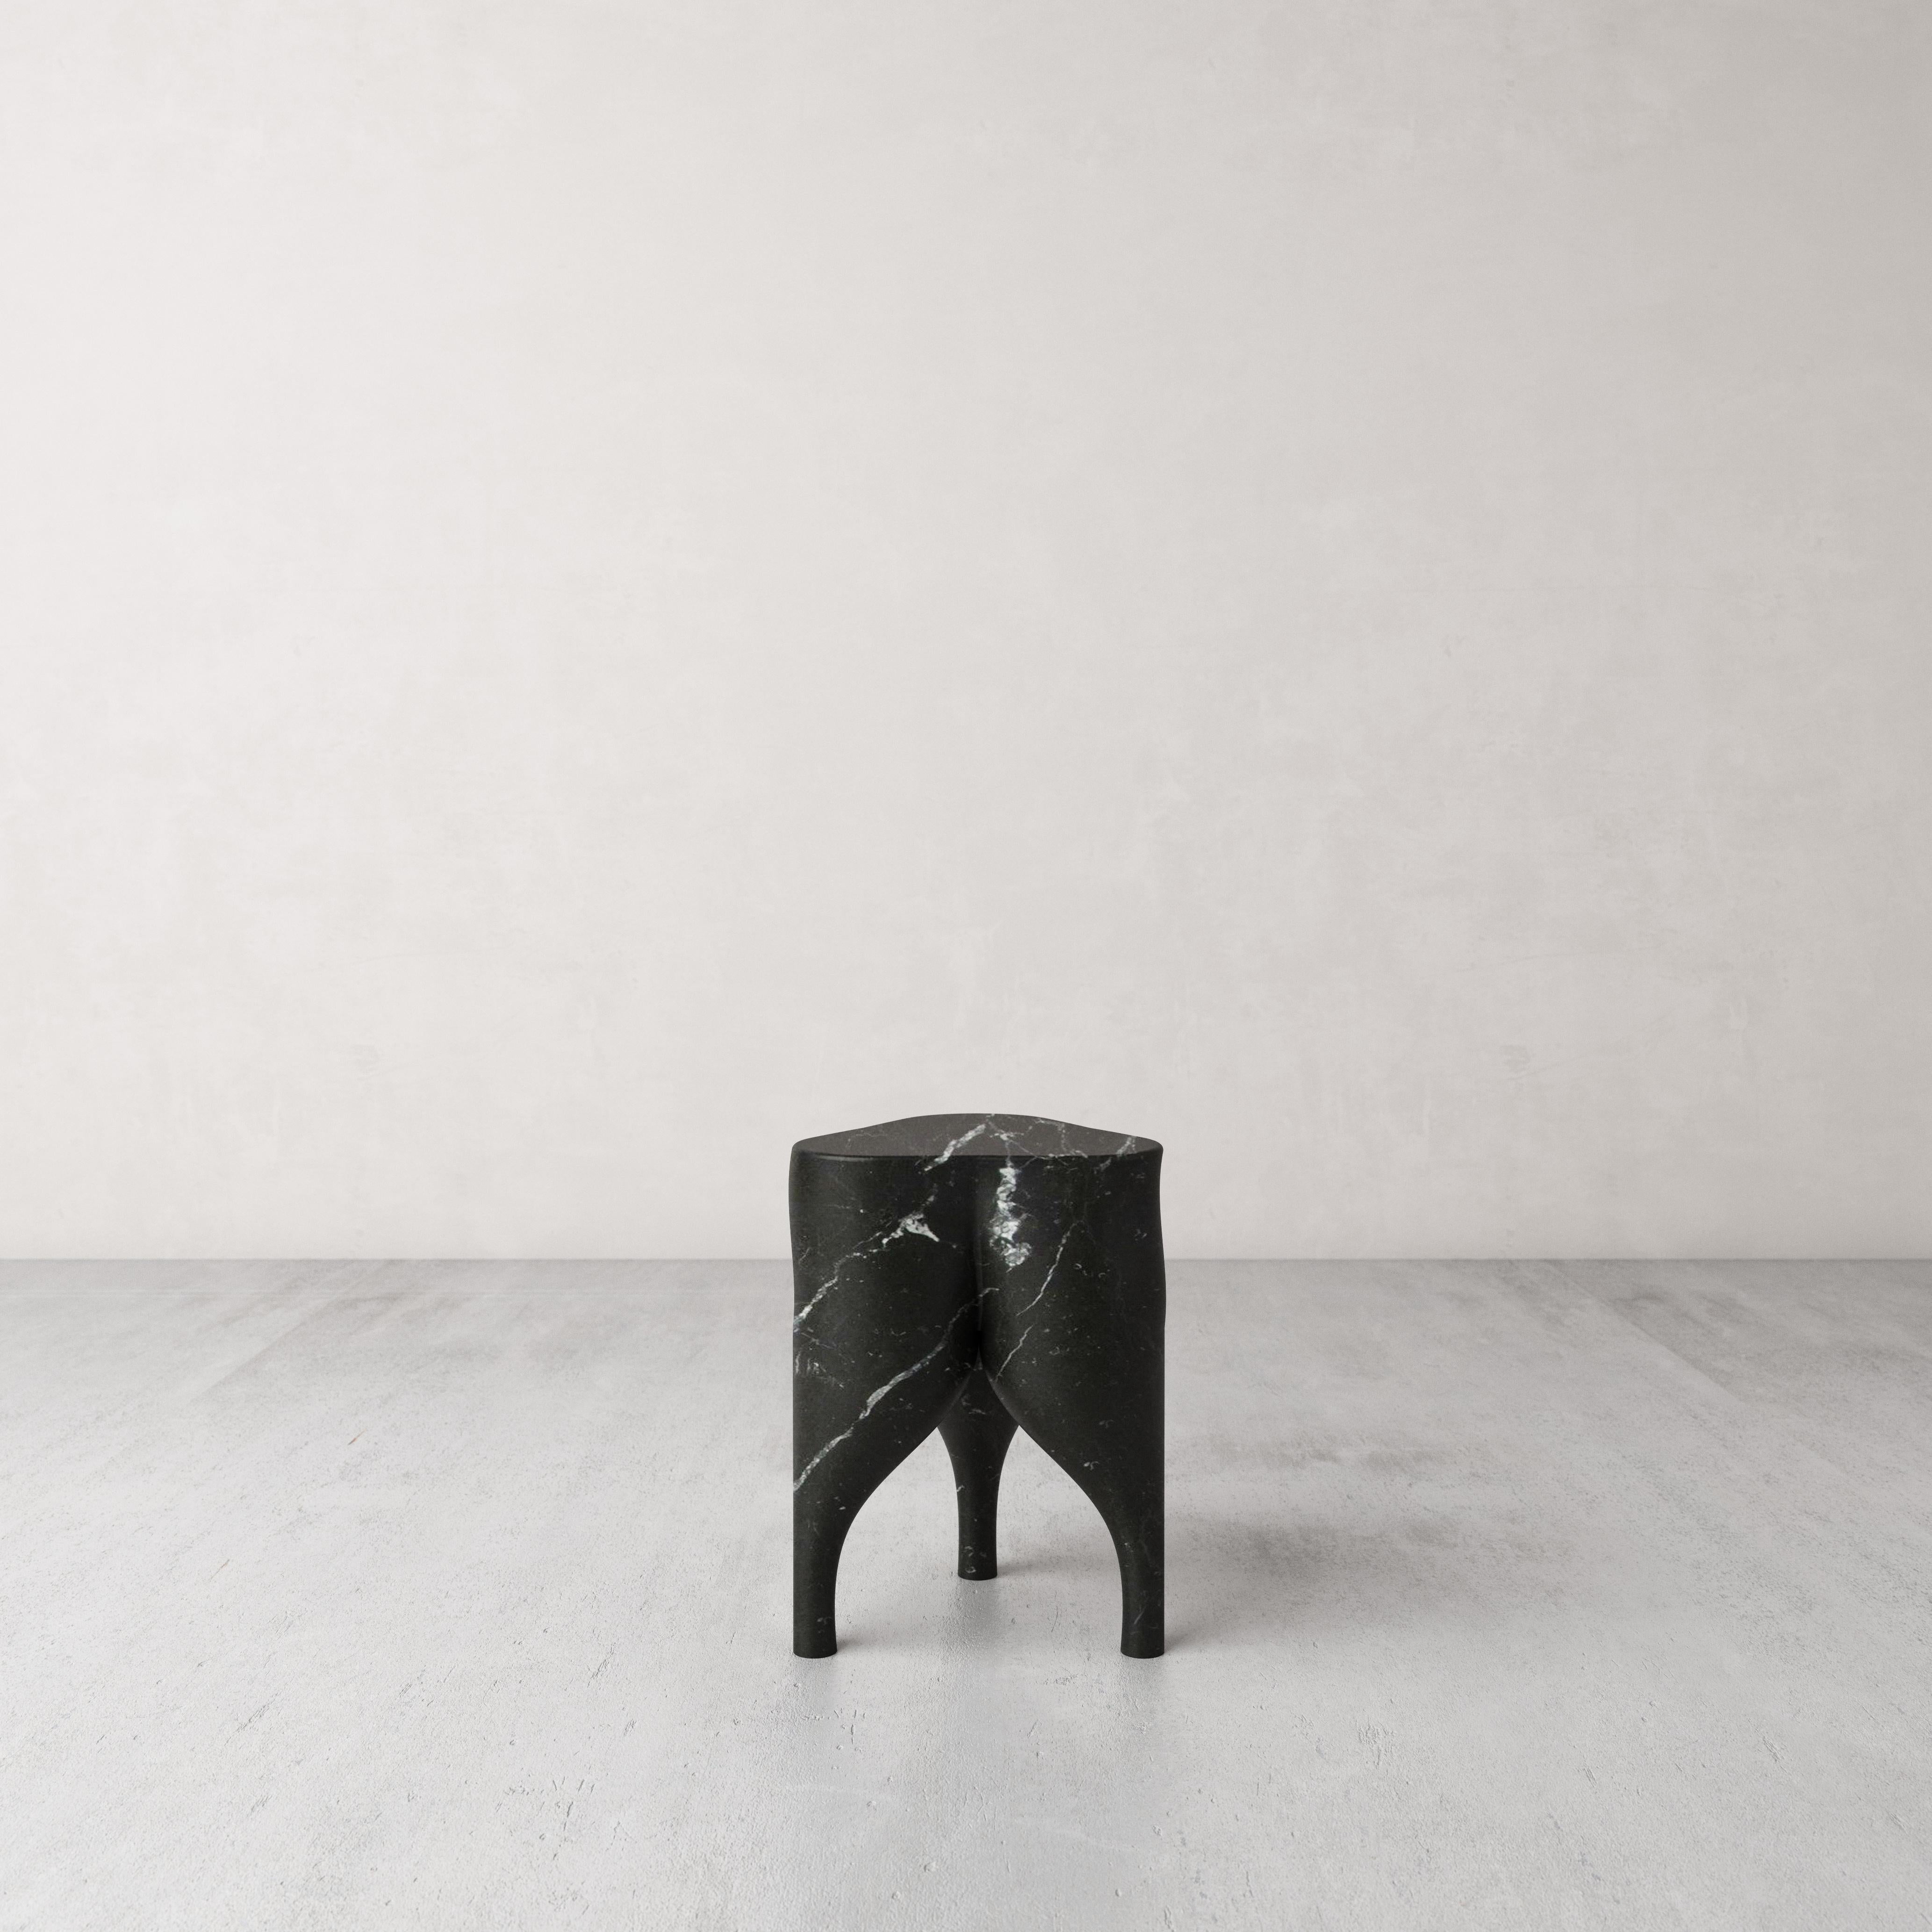 Ensemble of 3 Cha-Cha-Cha' stools by Pietro Franceschini
Sold exclusively by Galerie Philia
Materials: Nero Marquina marble
Dimensions:
1. W 30cm, L 30cm, H 45cm
2. W 30cm, L 30cm, H 56cm
3. W 30cm, L 30cm, H 56cm
Origin: Italy